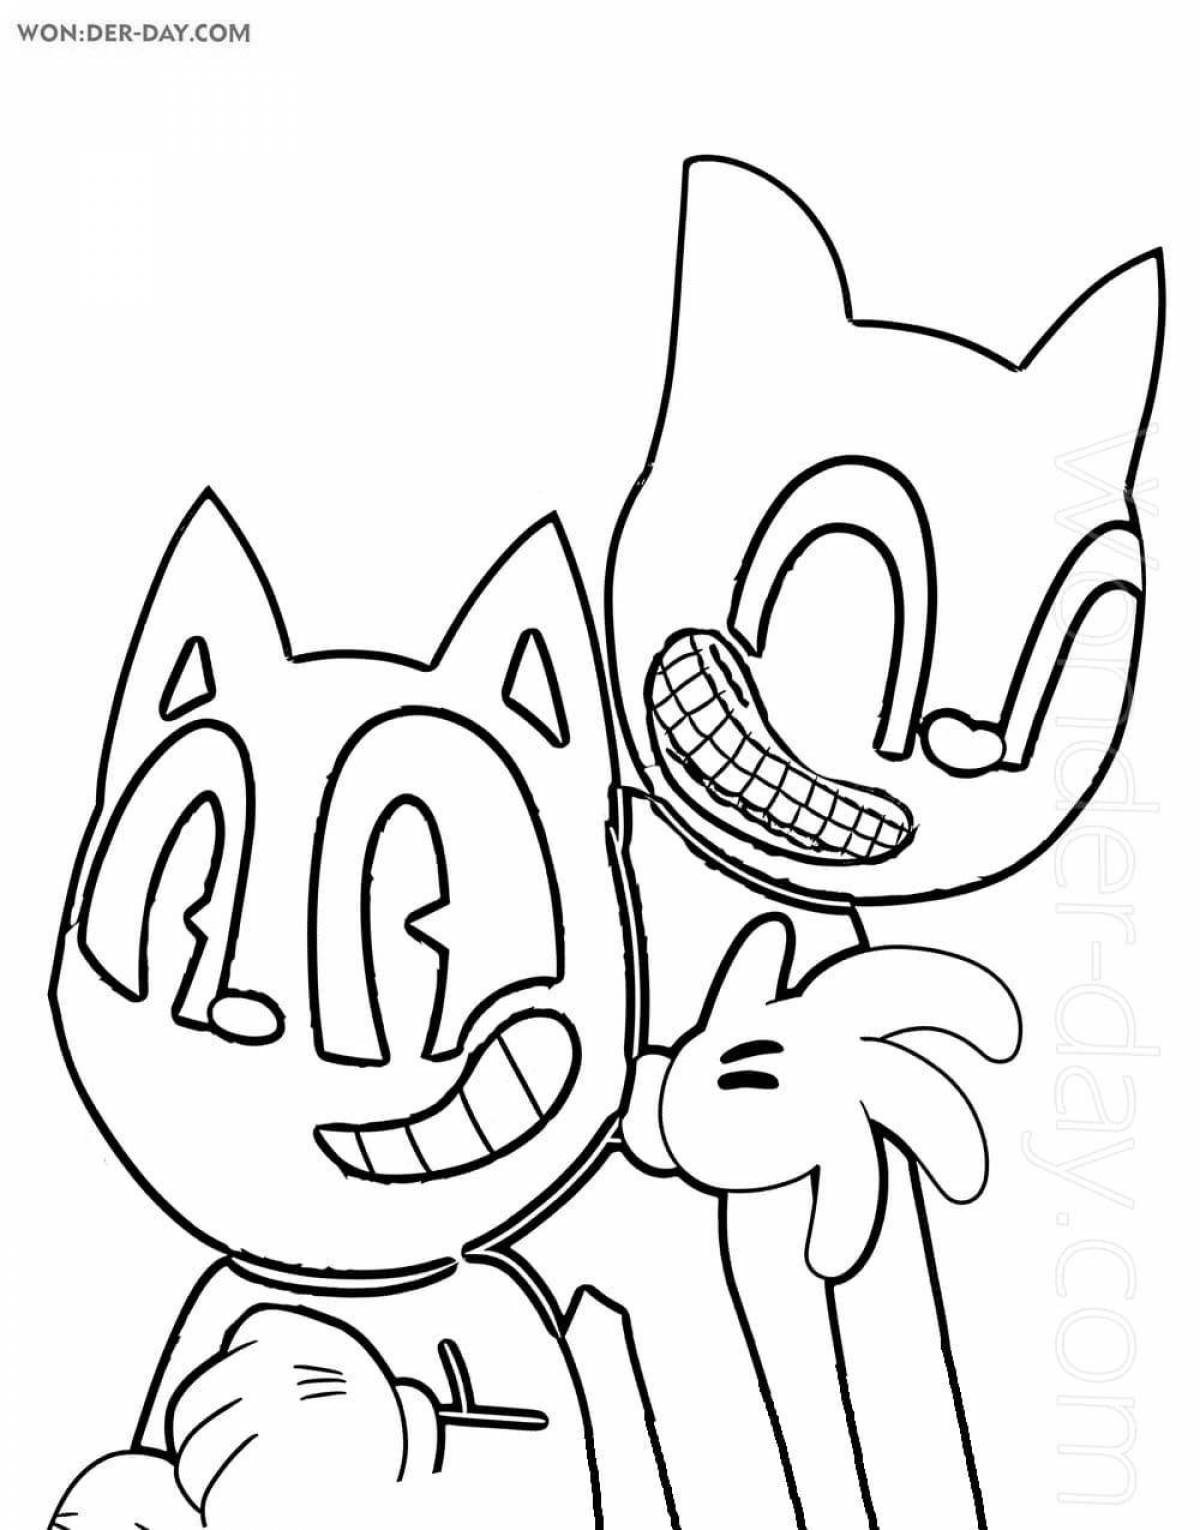 Coloring page charming red cat